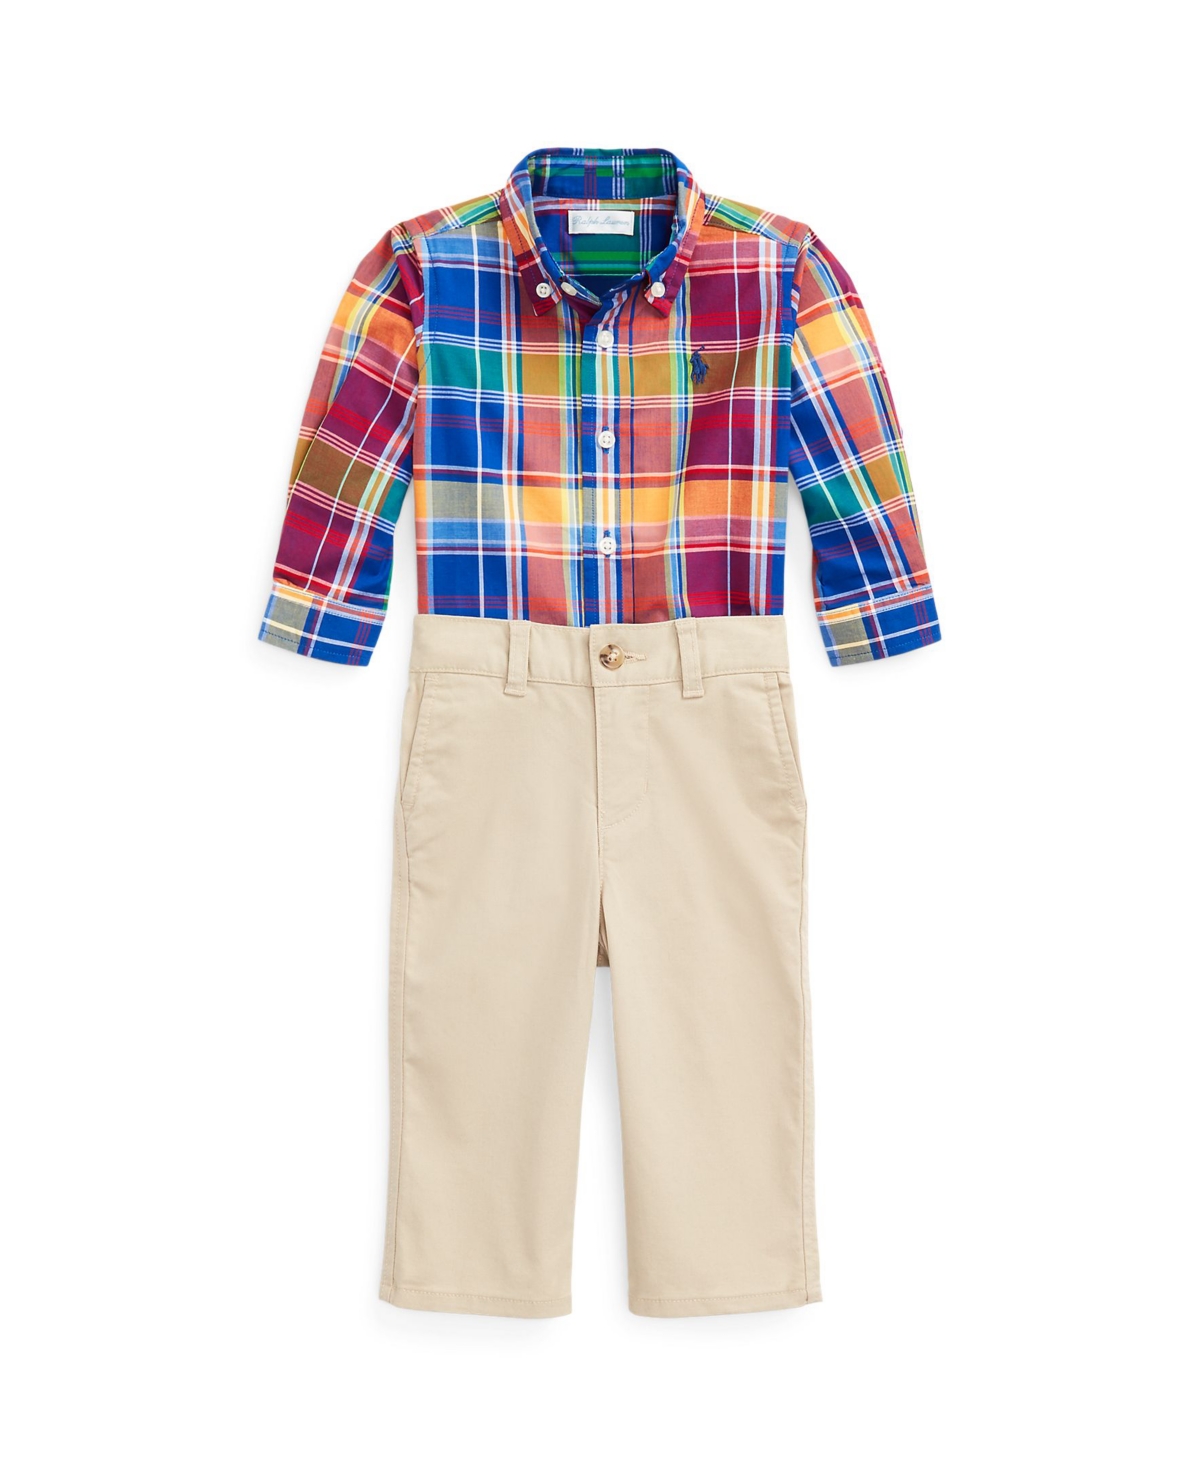 Polo Ralph Lauren Baby Boys Plaid Cotton Shirt And Chino Pants Set In Royal,red Multi